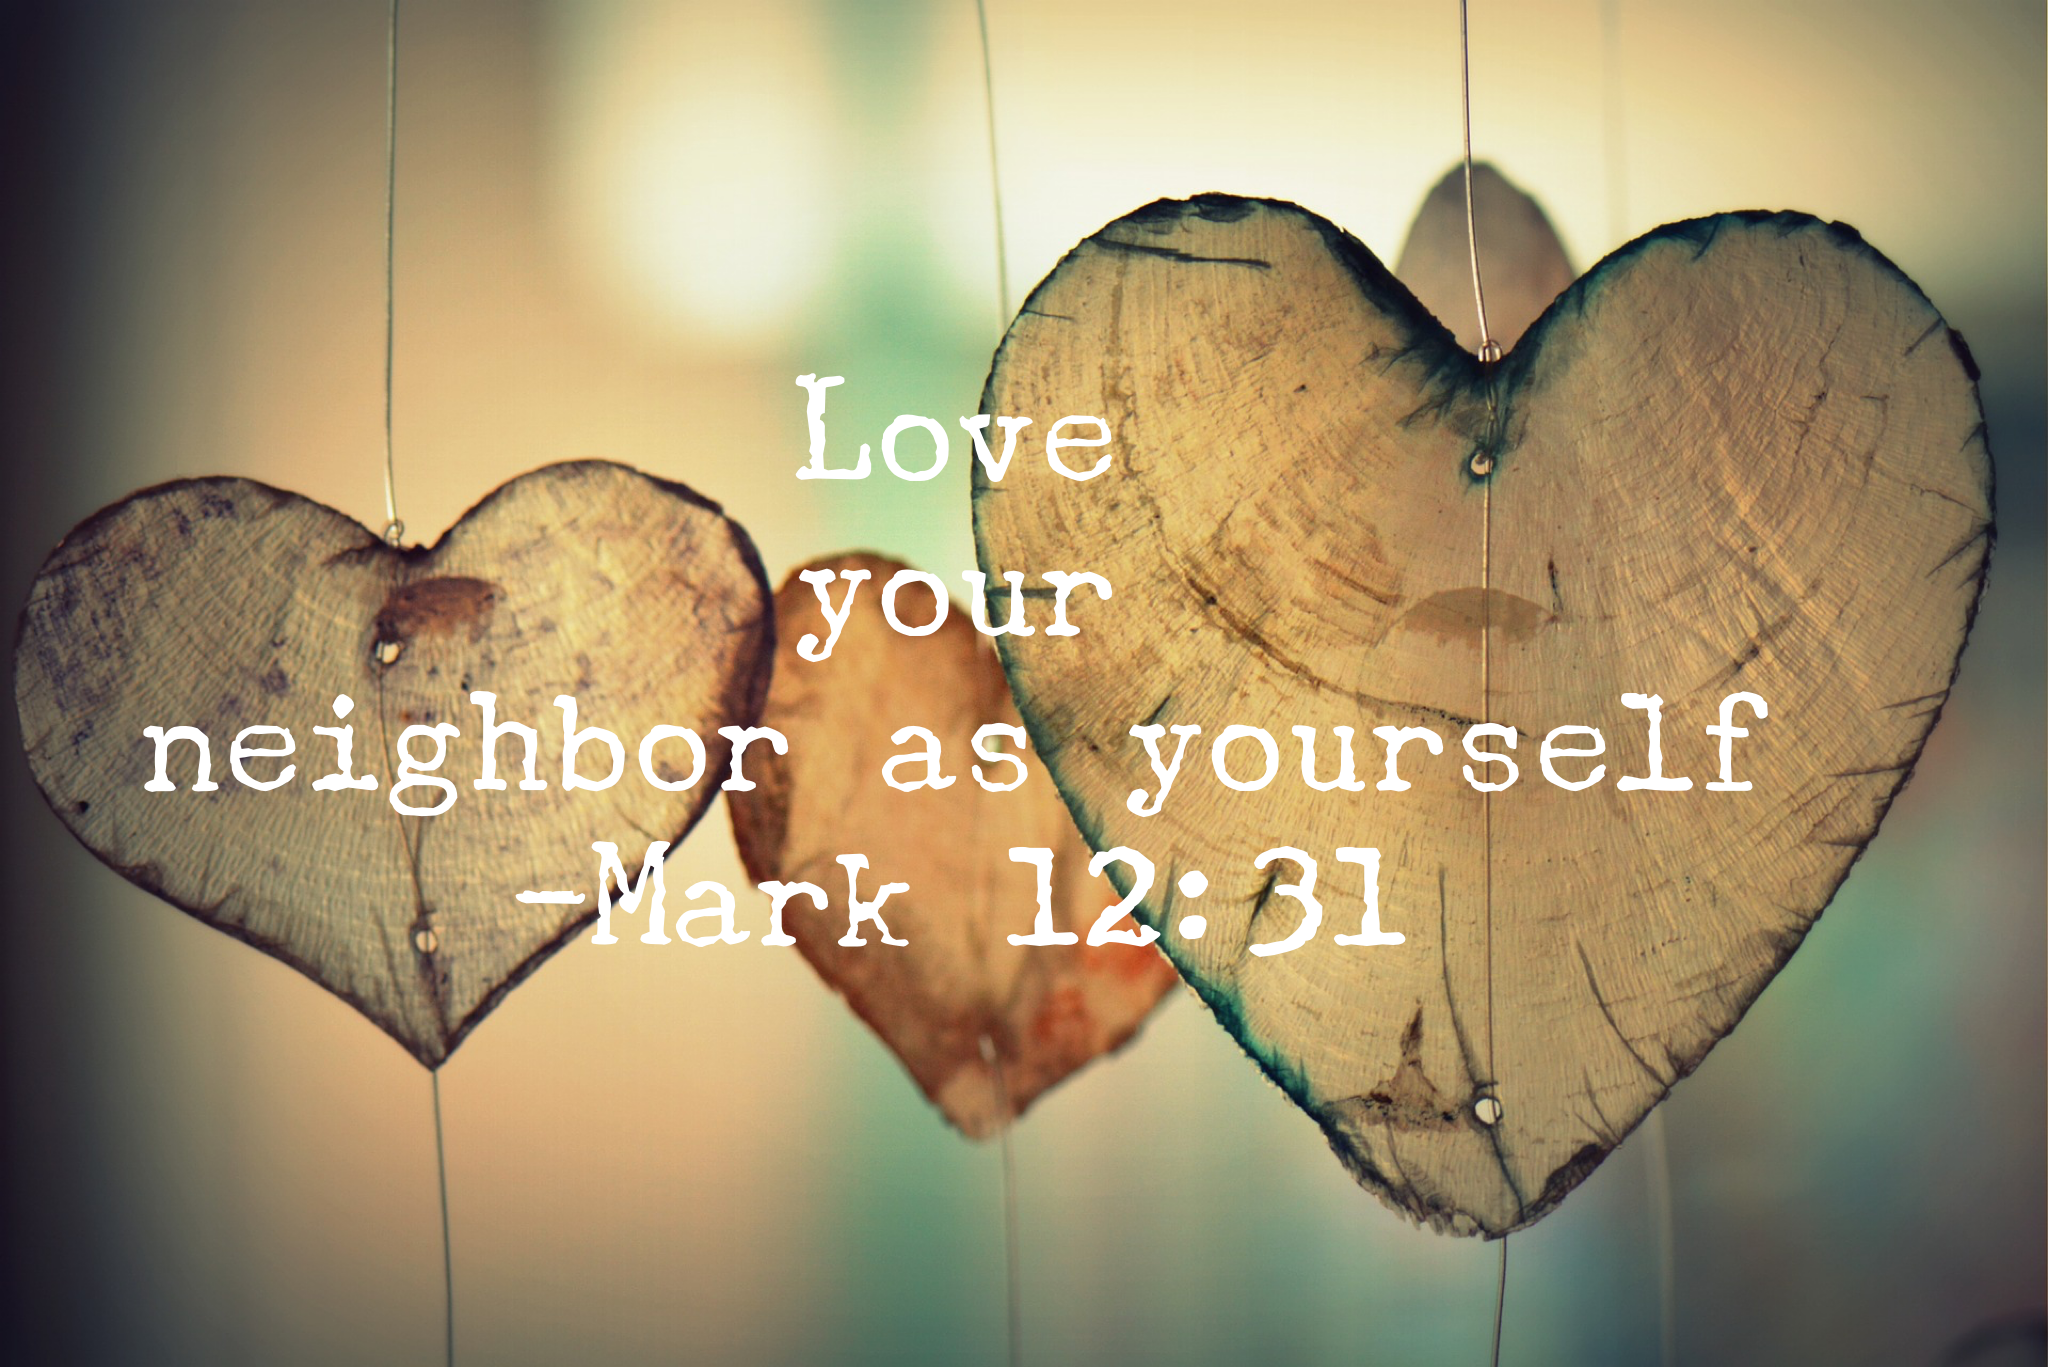 Love your neighbor as yourself…But what if you hate yourself?